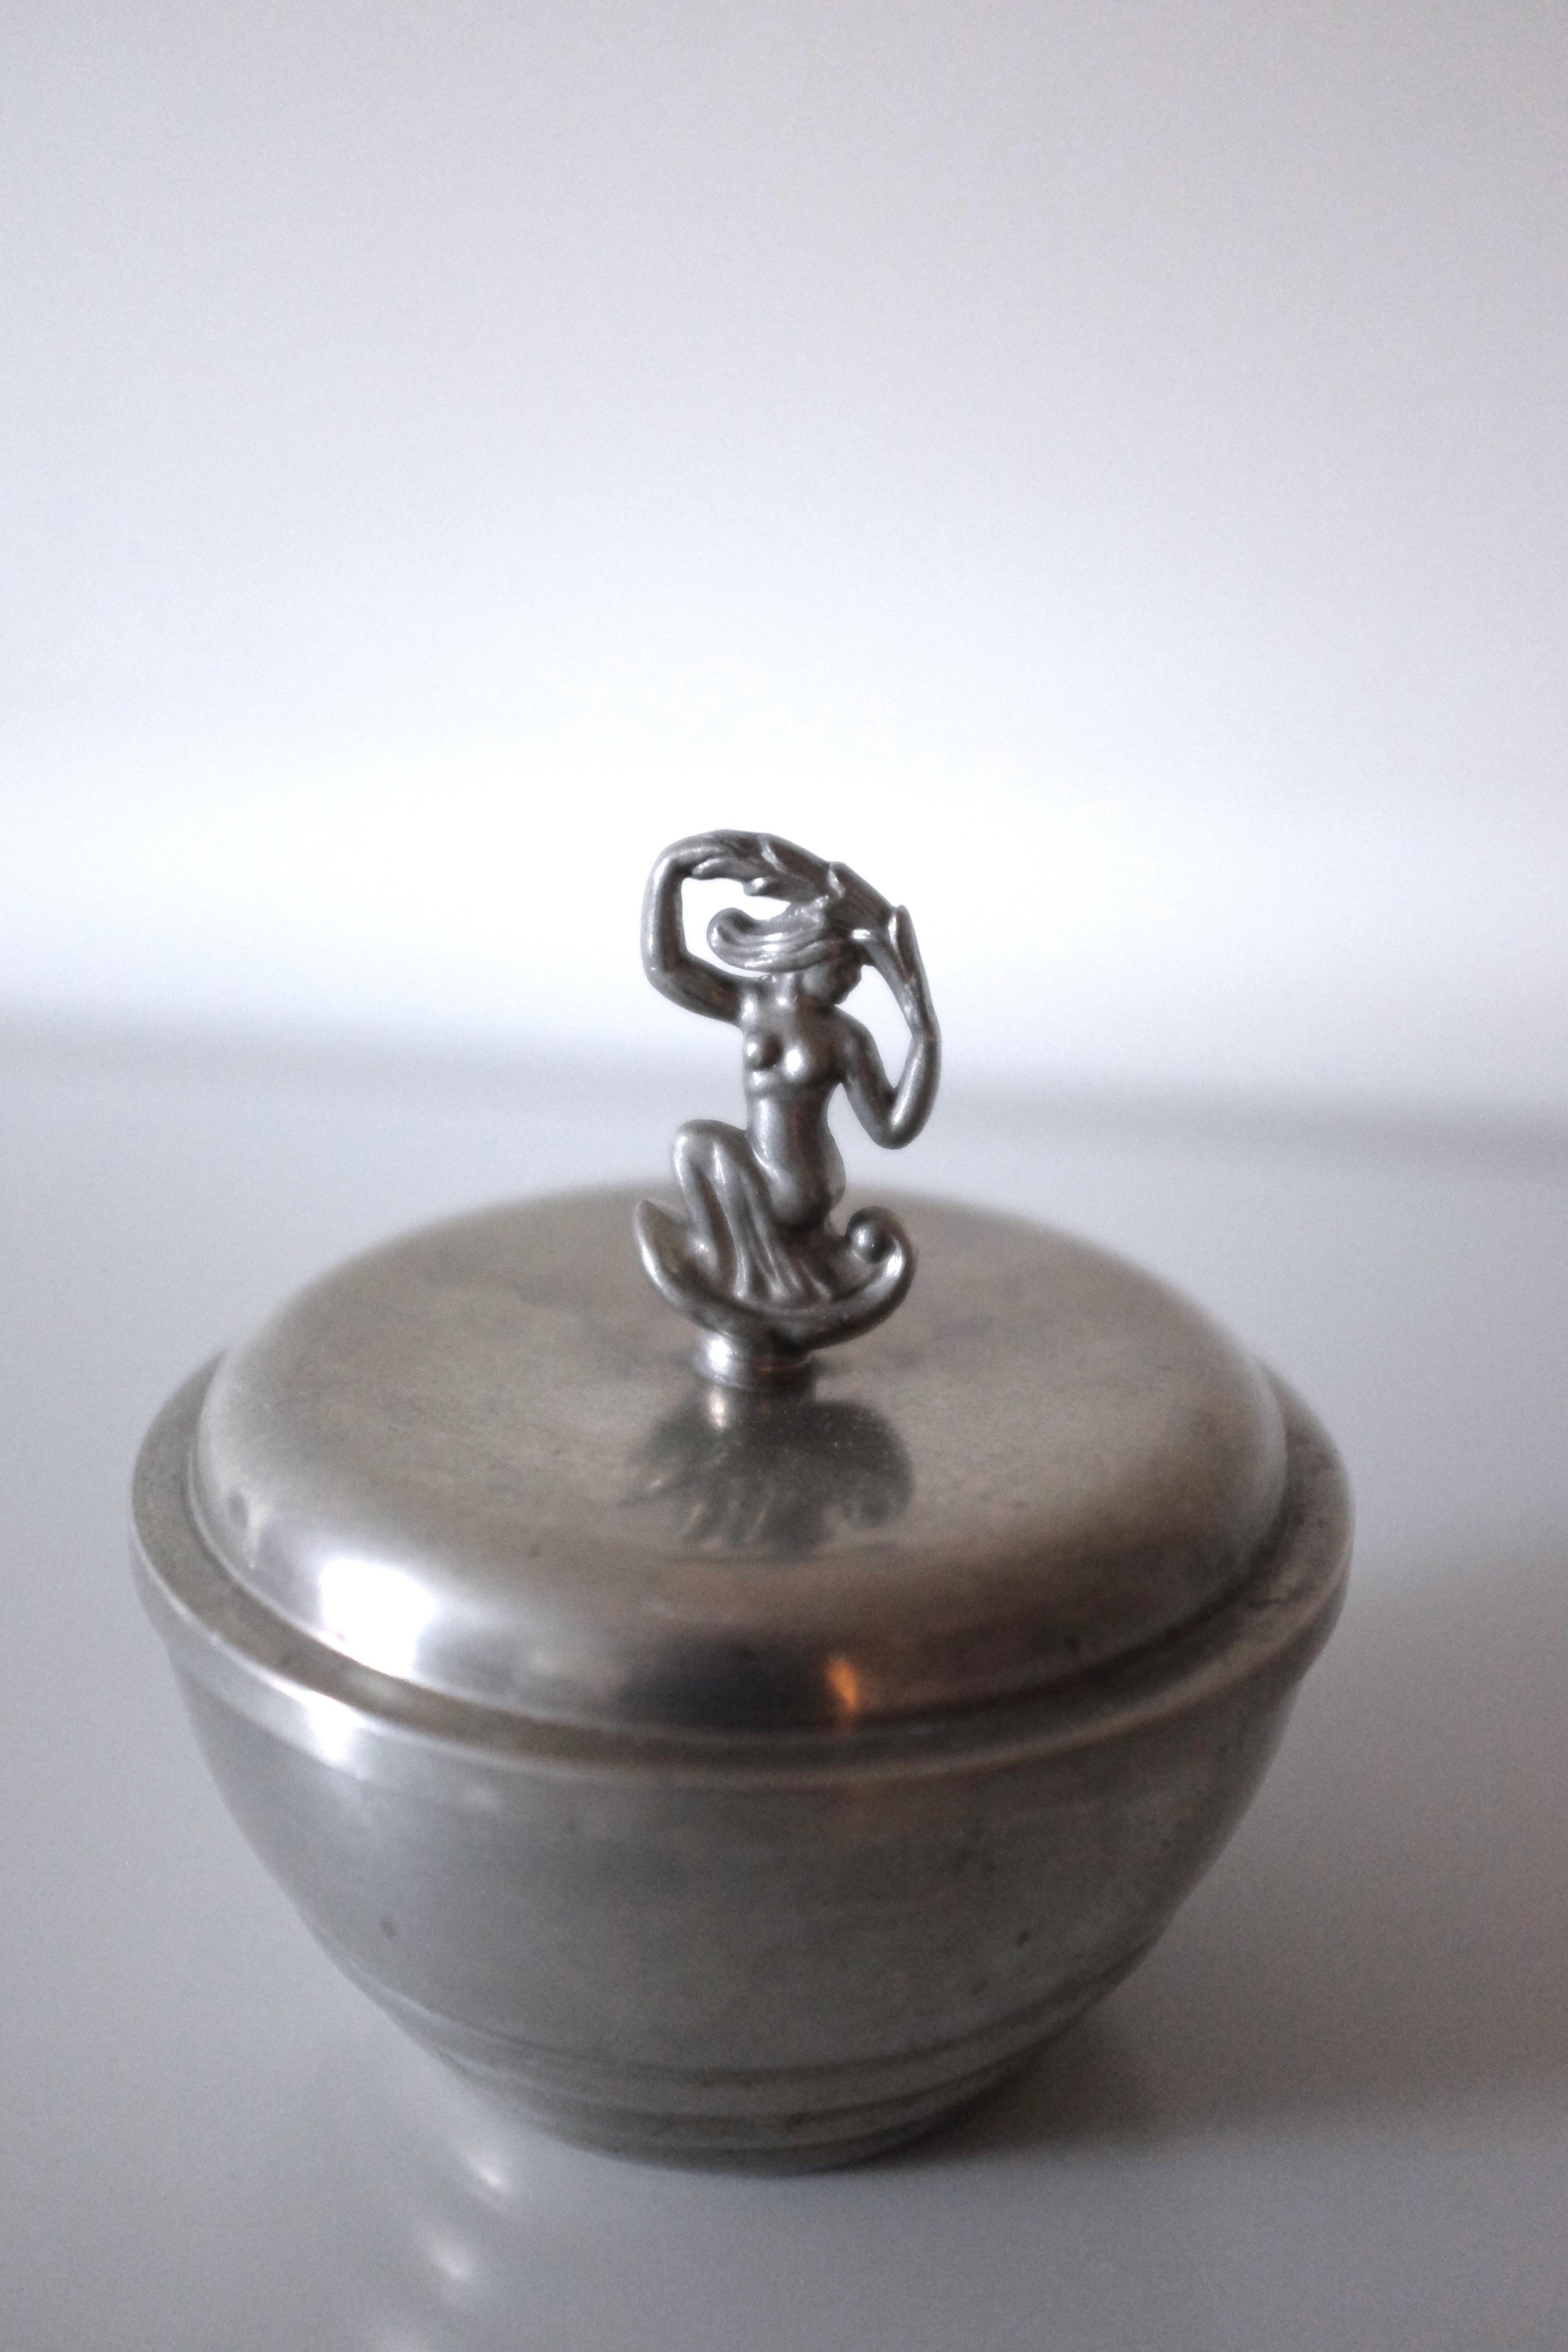 Gorgeous small vintage pewter jar from C.G Hallberg, Sweden, from 1932. Round shape with carved lines along the body and a decorative ornament on the top of the lid. The top lid has a small dent but not noticeable when closed. Manufacture marks at